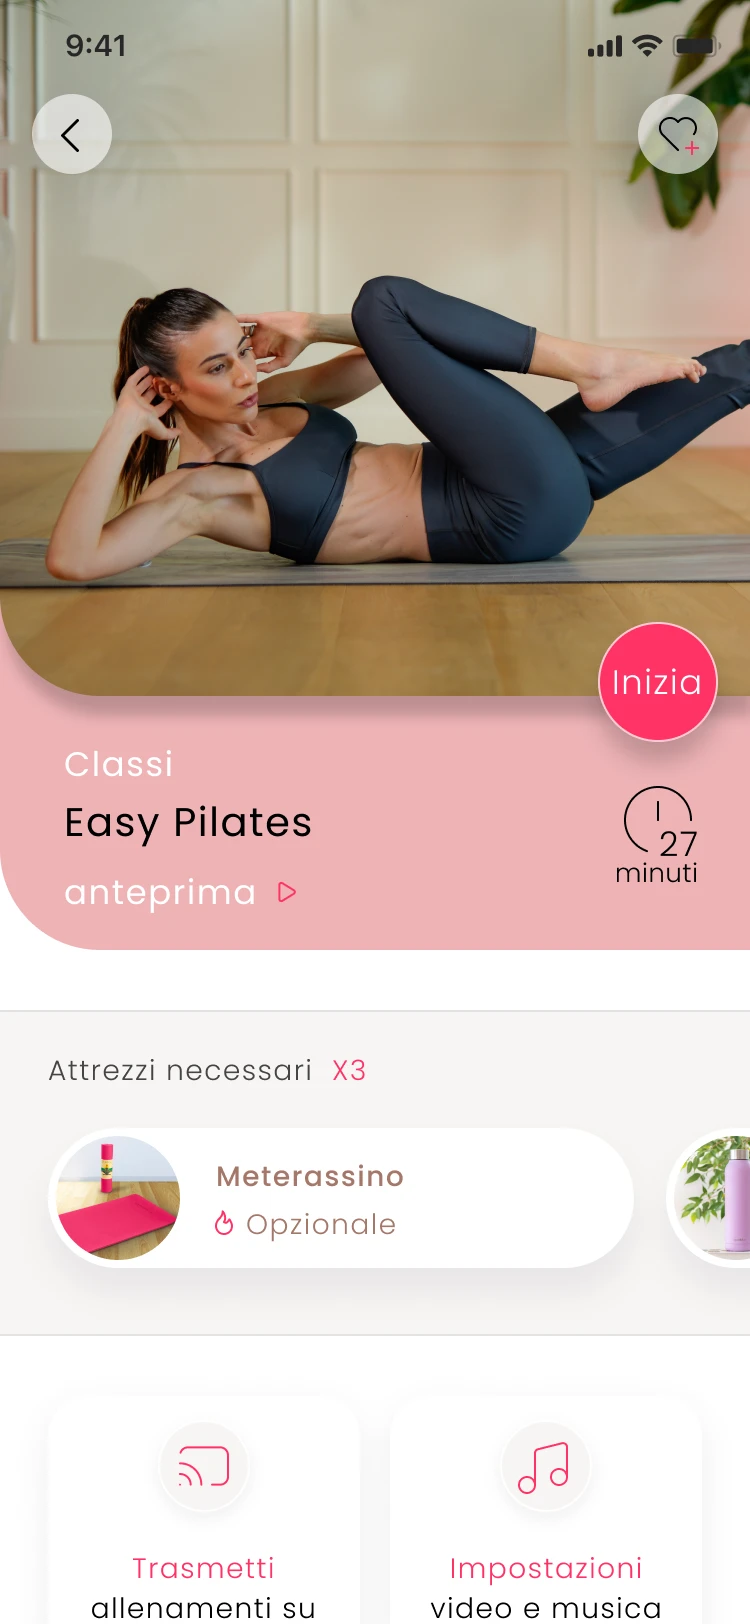 Traininpink workout and fitness app